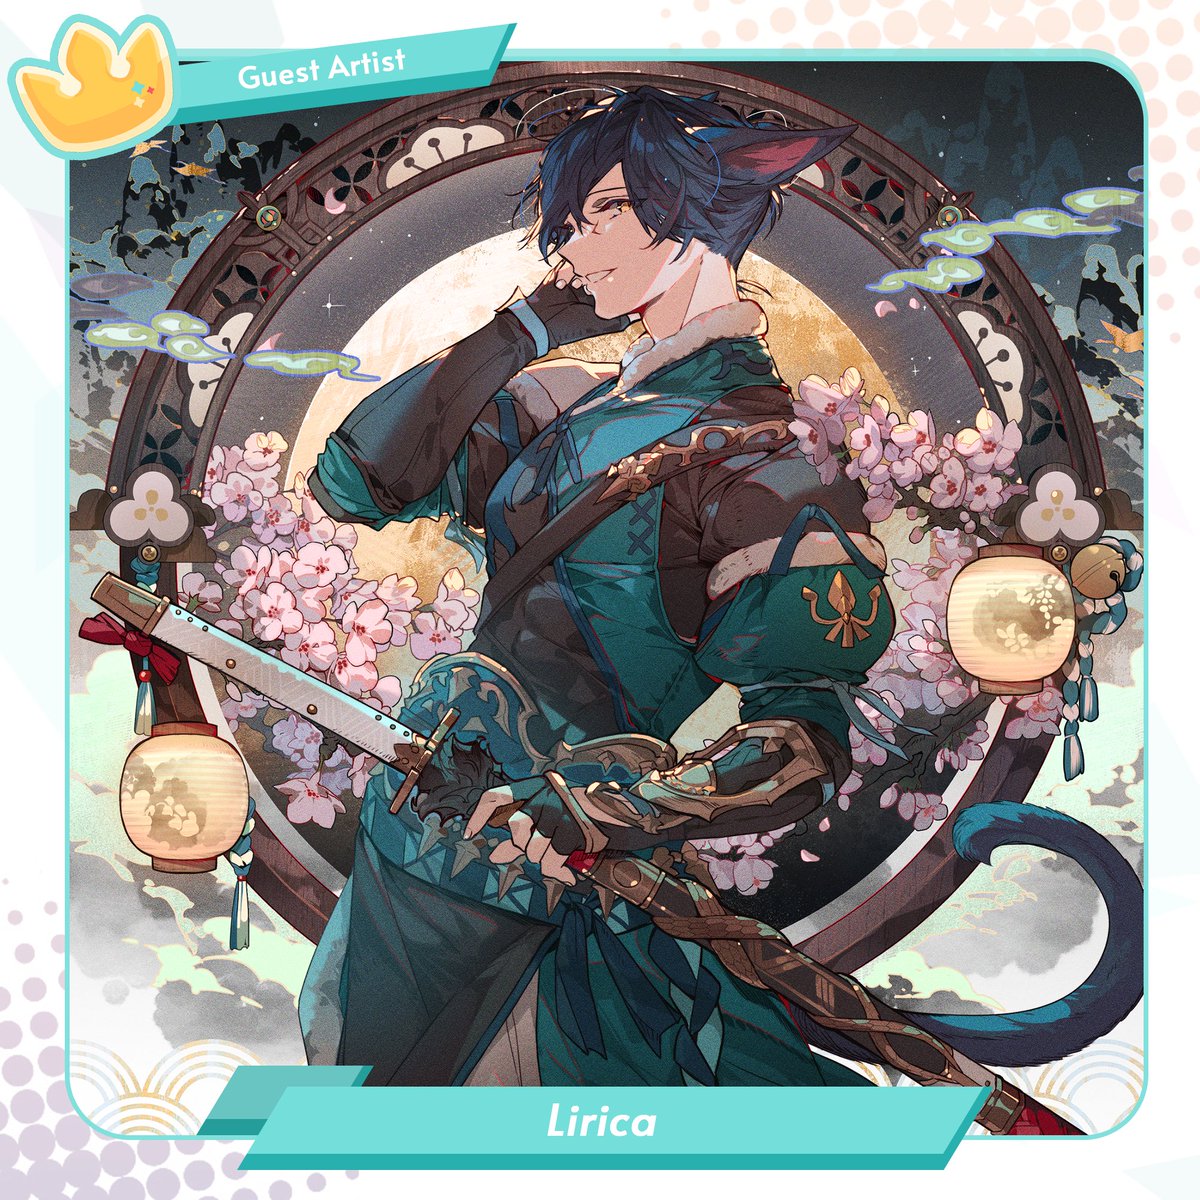 ⭐Lirica⭐ will be attending #makersquestsg ! Our guest artist reveals begin! Come to meet your favorite artists as they share their love of Eorzea with you through their art 📅Event: Makers Quest SG Date: 12 Aug 2023 Time: 10am-7pm Venue: Suntec Lvl 3 Concourse Free Admission